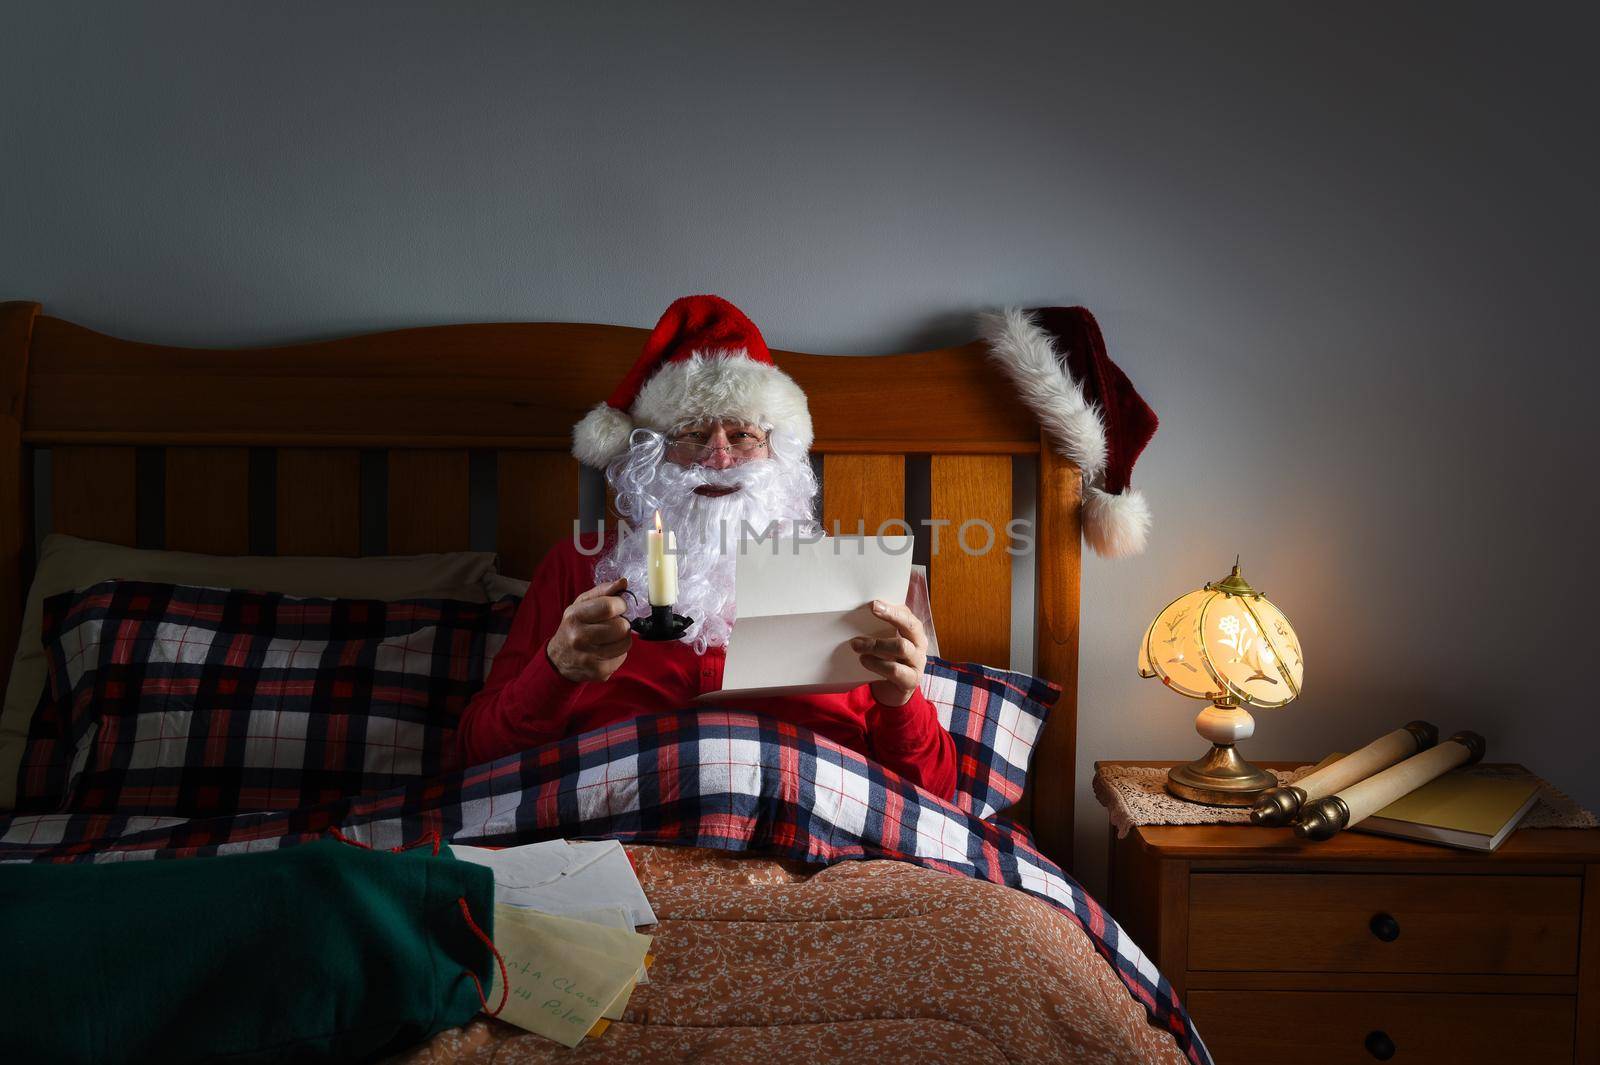 Santa Claus reading letters by candlelight in bed at his North Pole home.